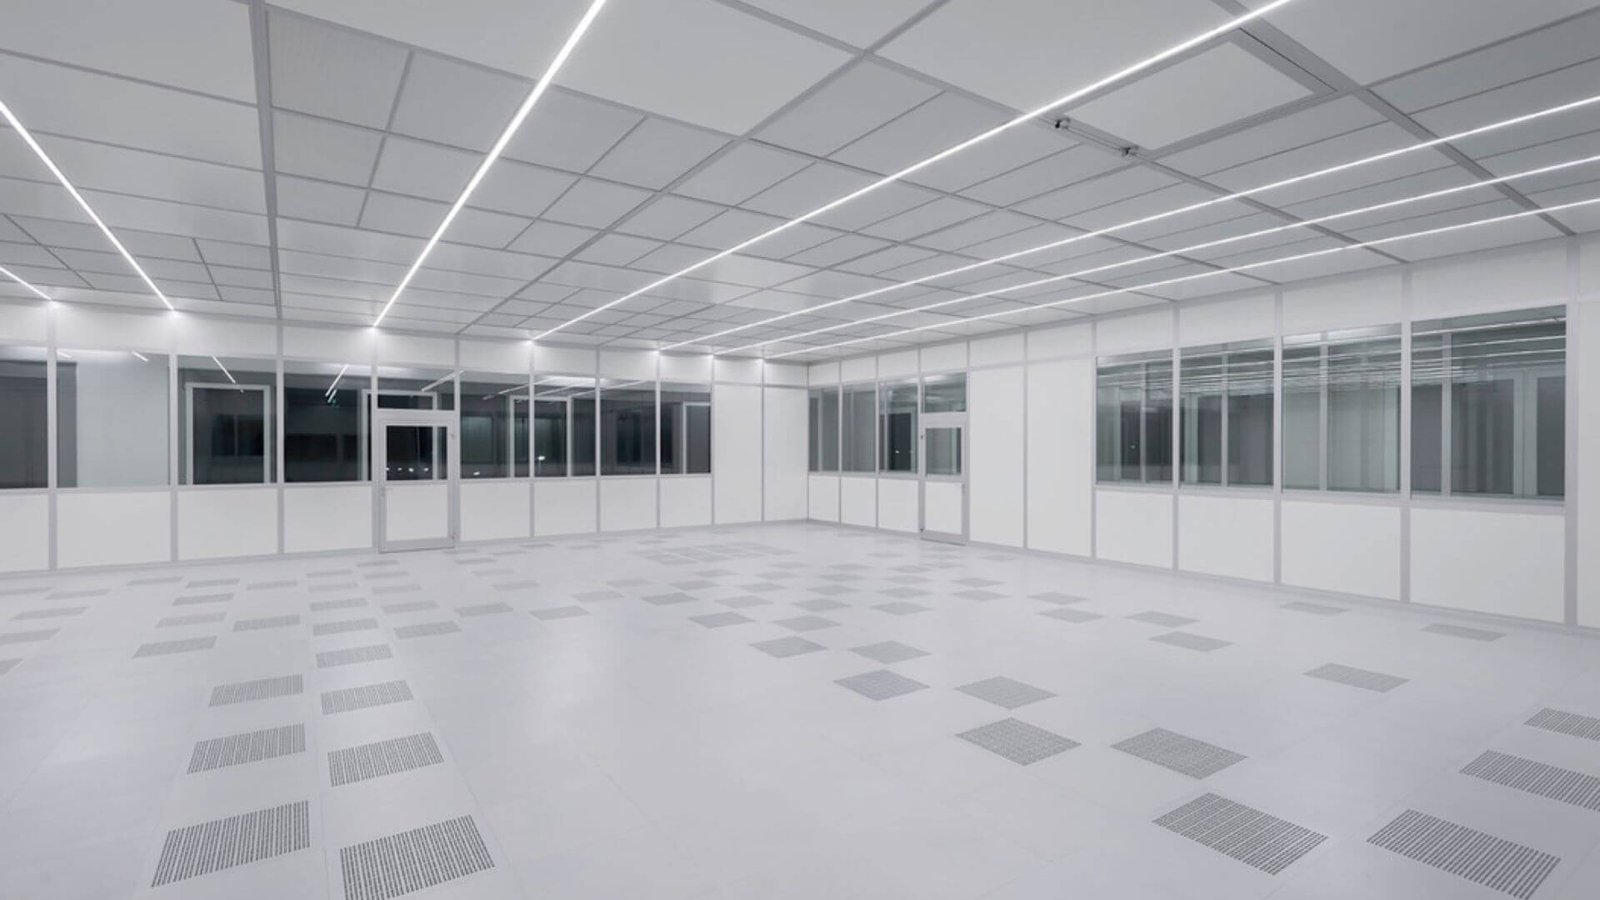 Innovations in cleanroom LED lighting technology